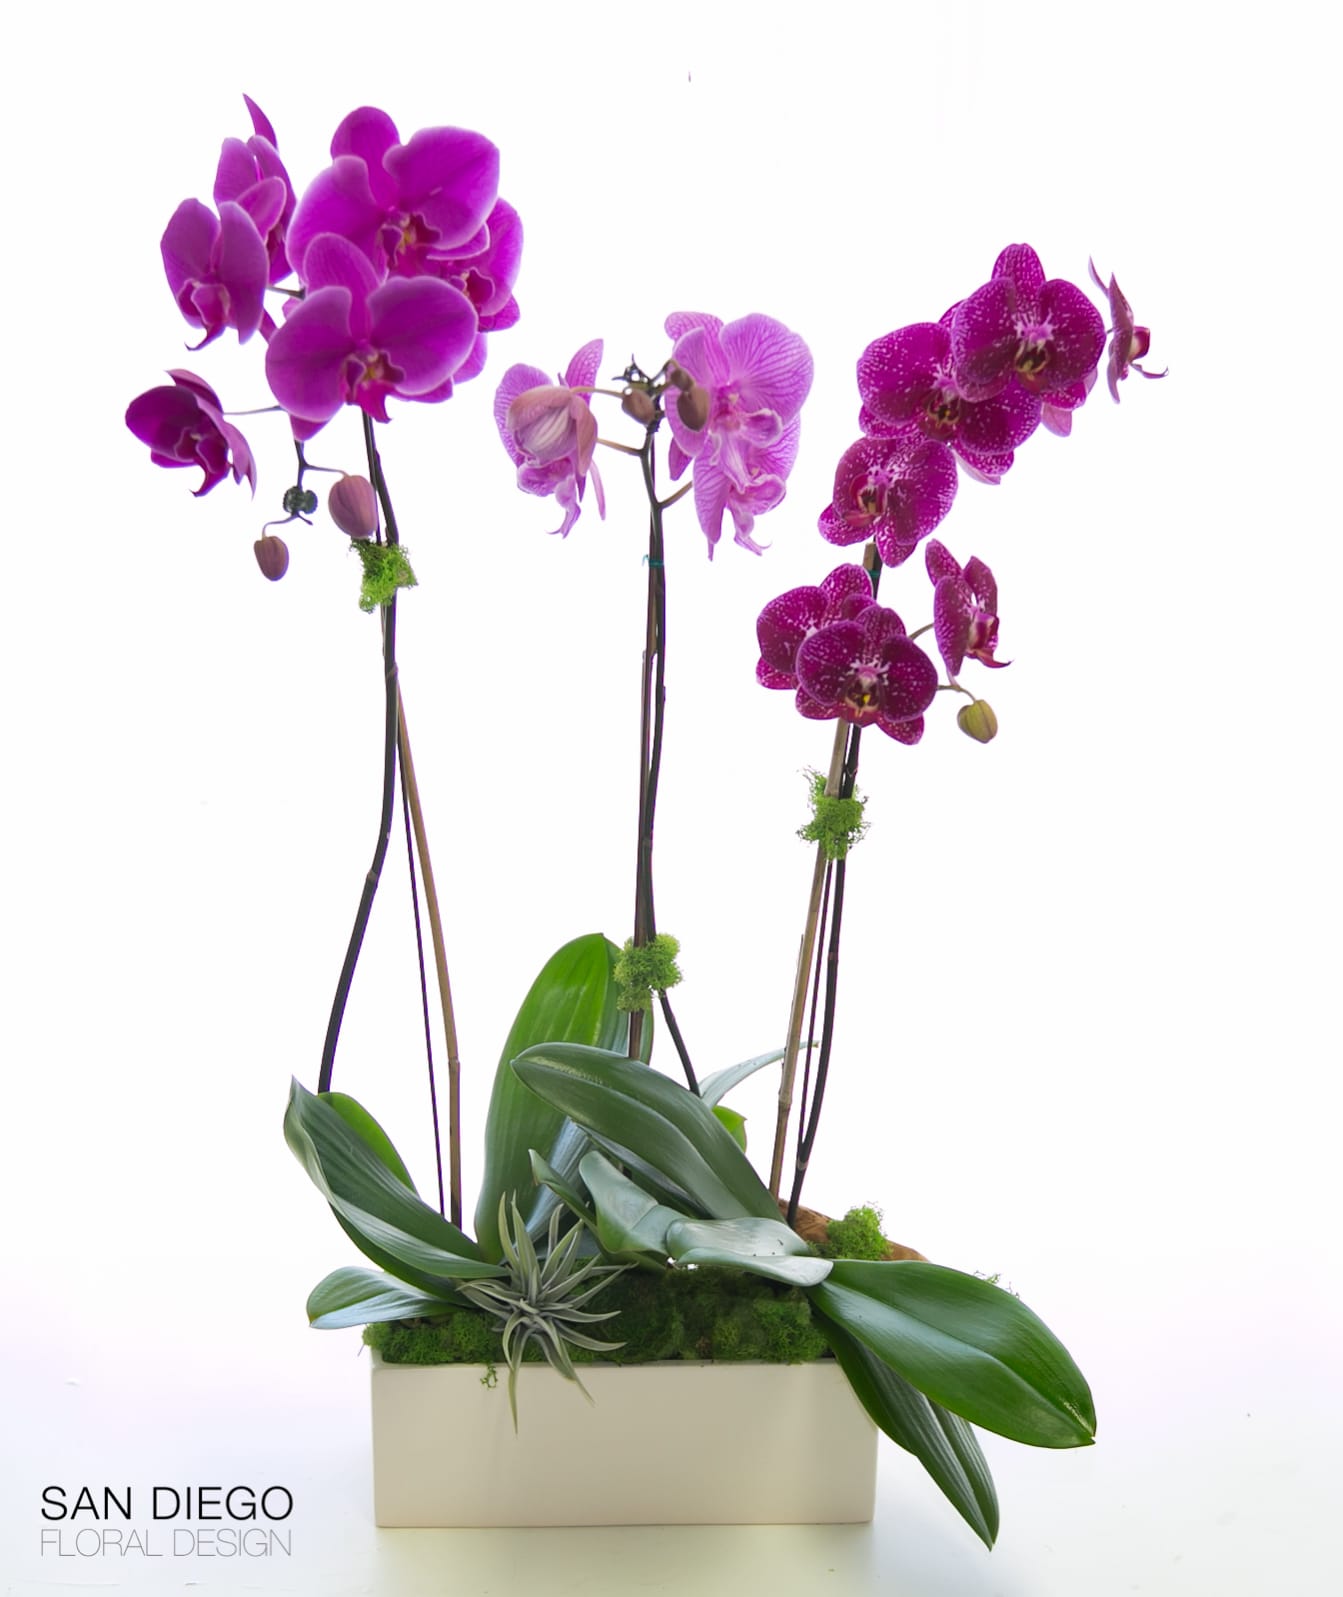 Orchids and air Plants  - Three beautiful exotic Phalenopsis orchids in purple tones arranged in a modern white ceramic container accented by Air Plants accented by driftwood and moss.